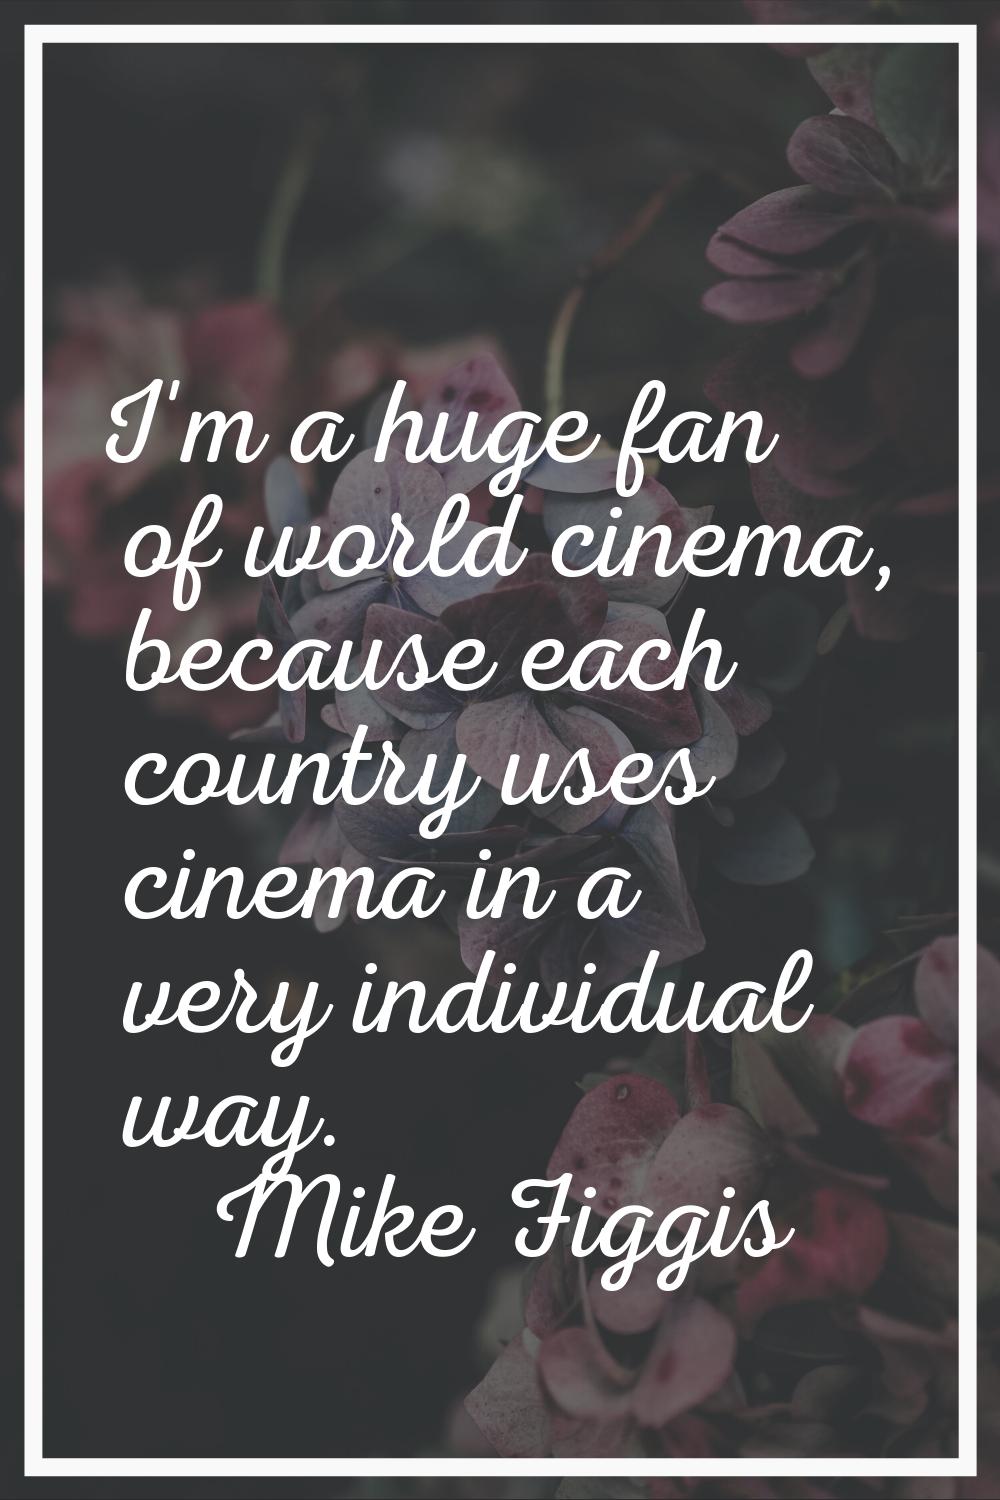 I'm a huge fan of world cinema, because each country uses cinema in a very individual way.